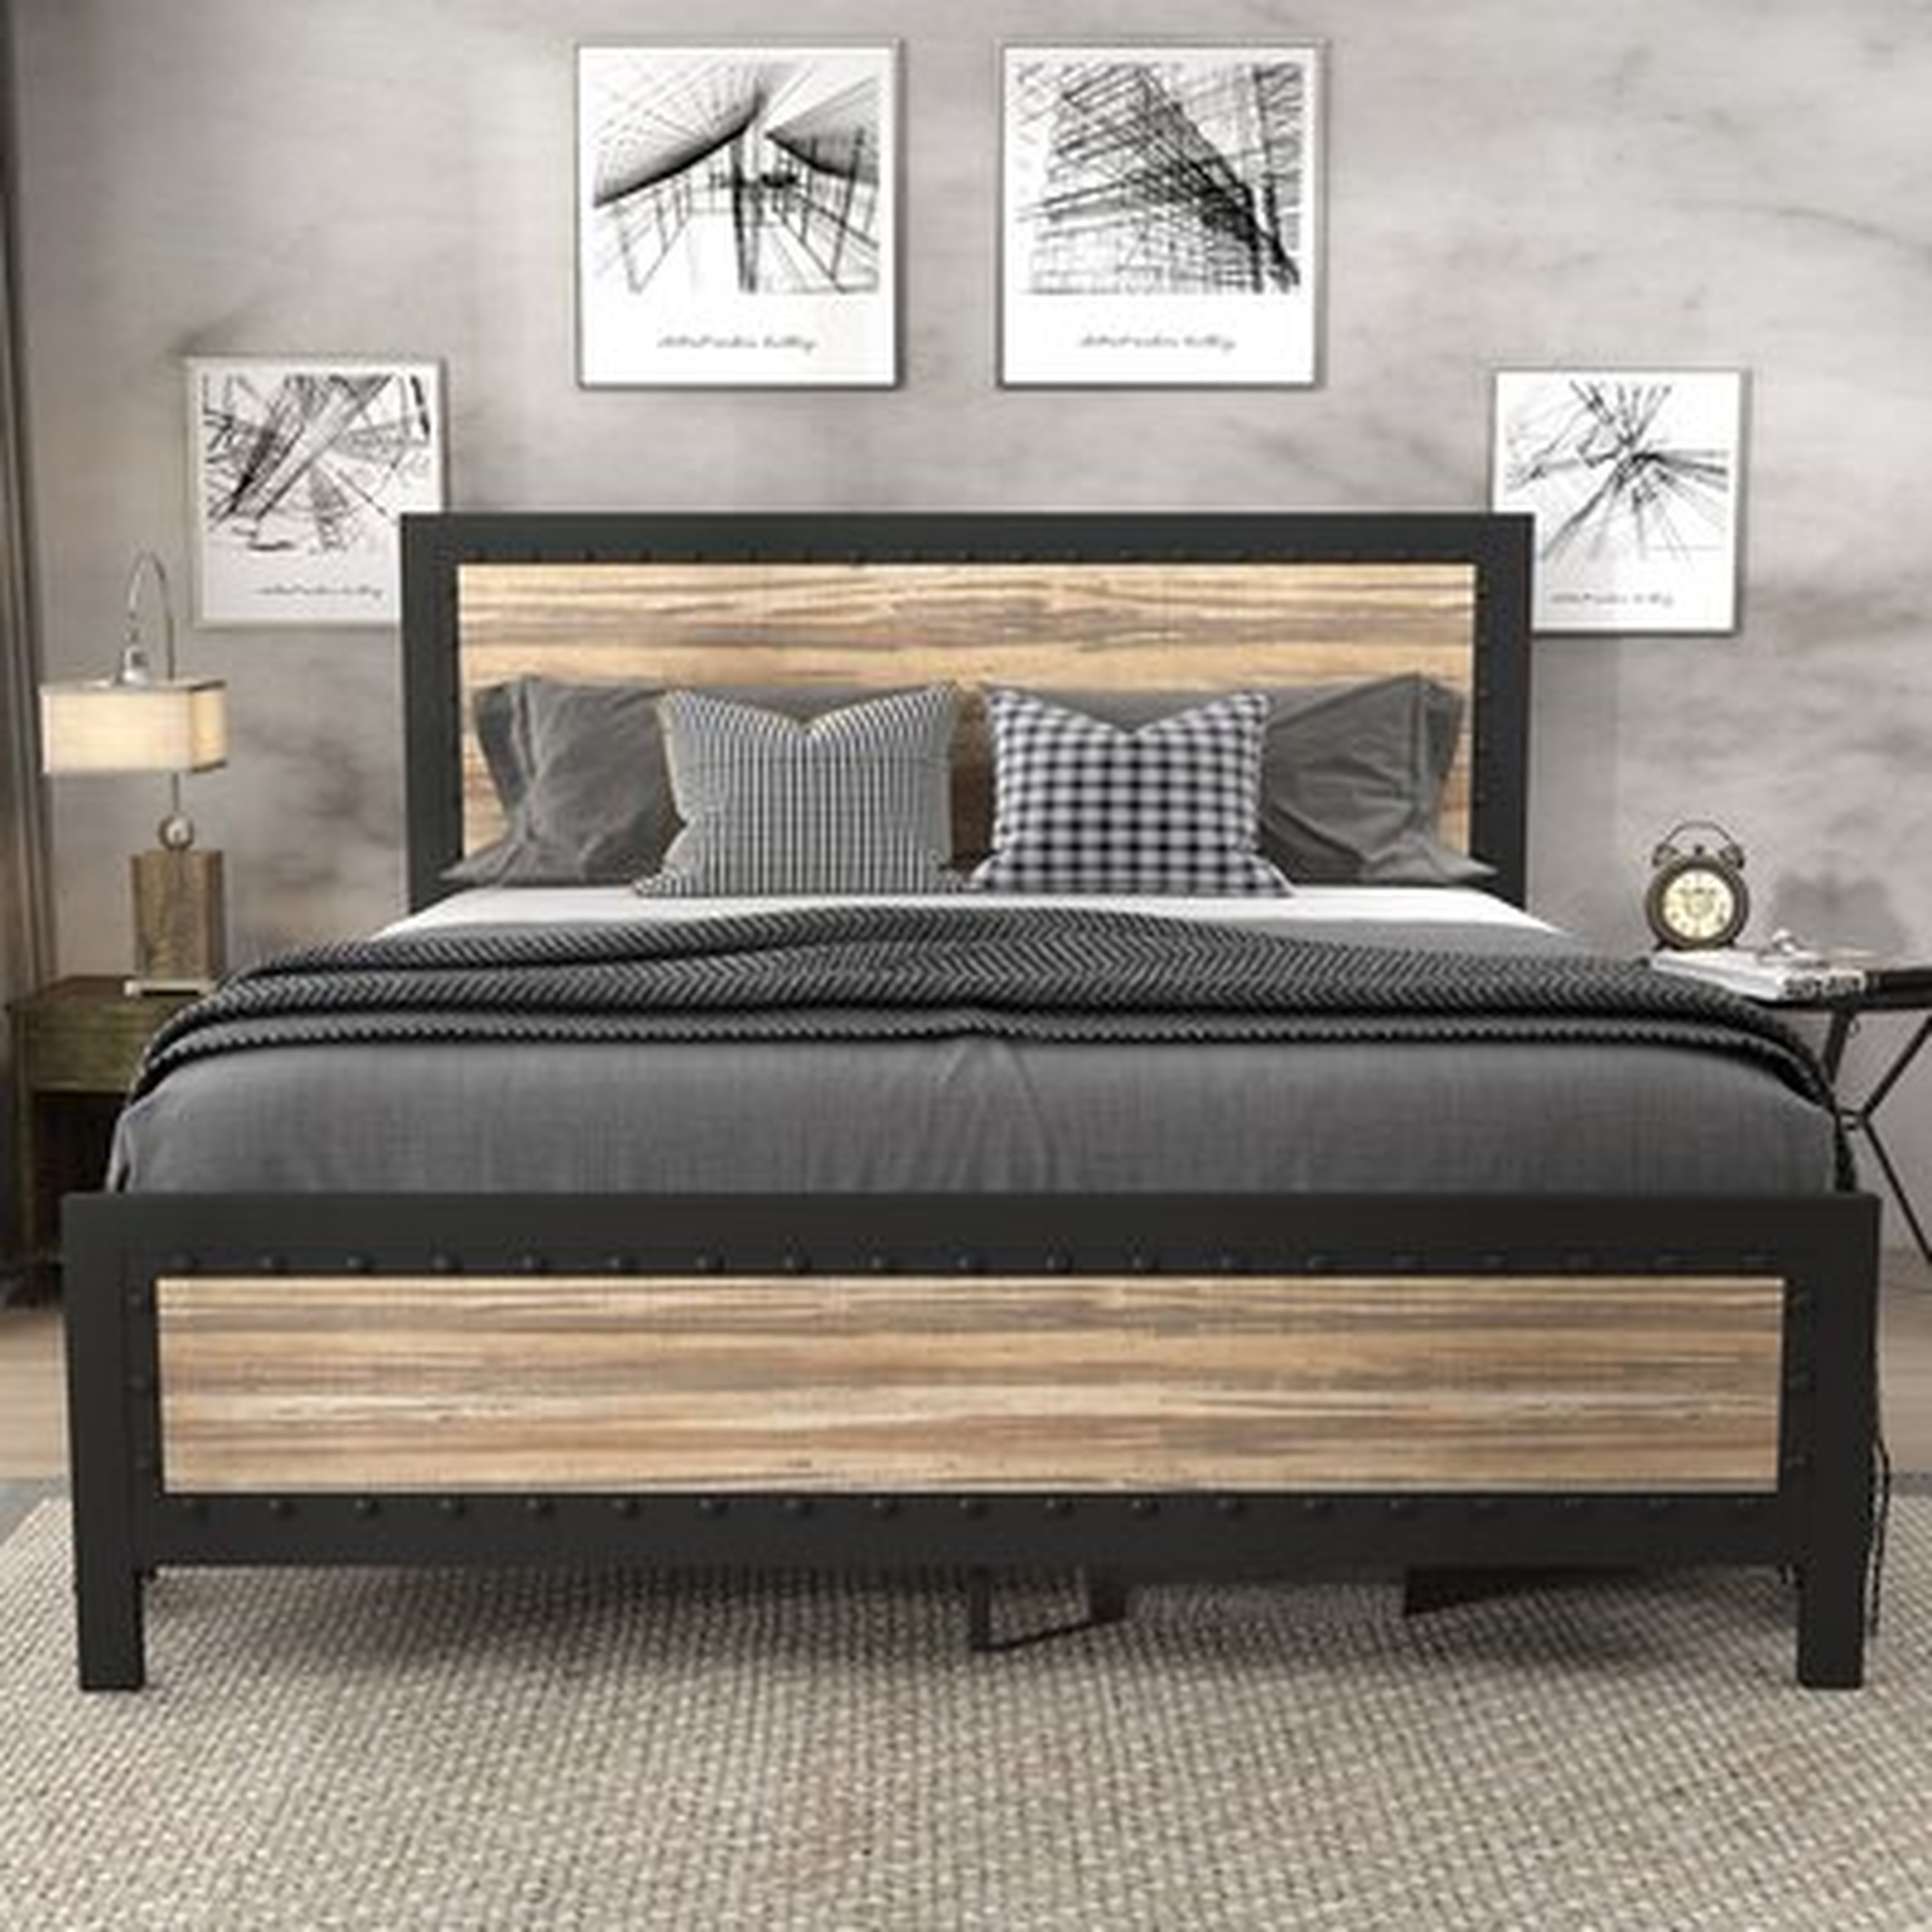 Heavy Duty Full Size Bed Frame / Metal Platform Bed With Rivet Wooden Headboard Footboard / 13 Strong Steel Slats Support / No Box Spring Needed - Wayfair